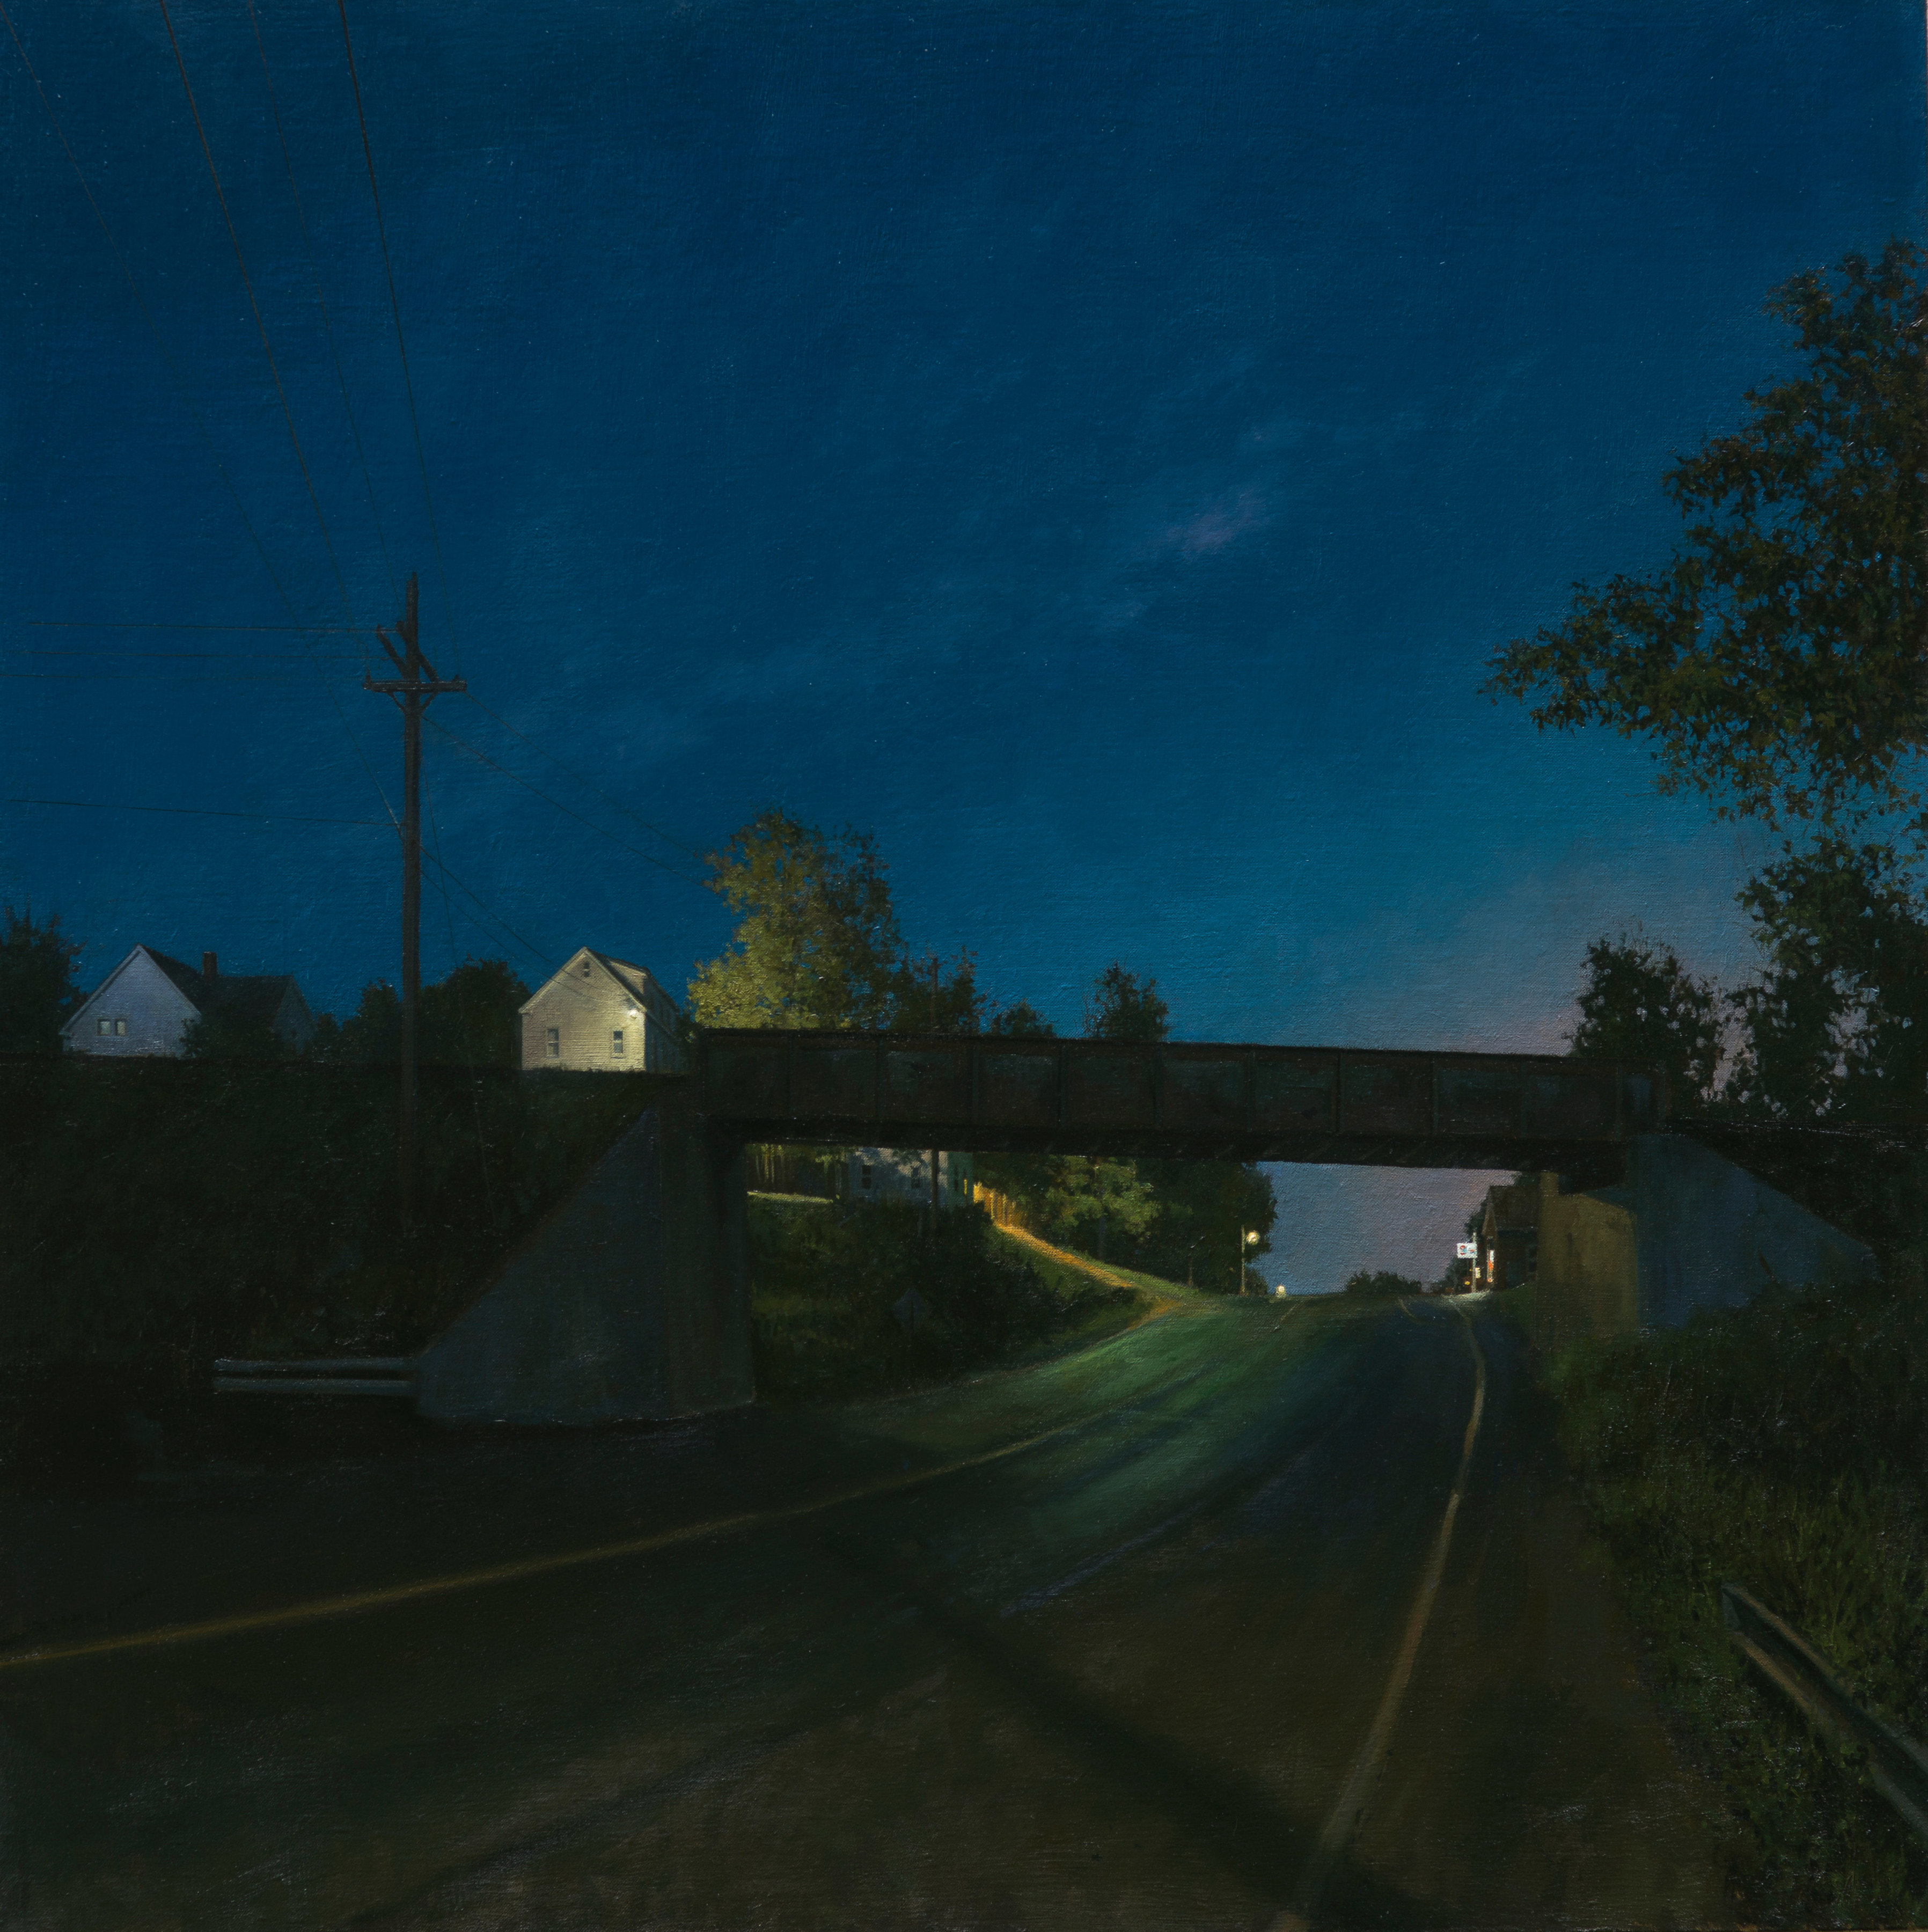 linden frederick, South Bound (SOLD), 2014, oil on linen, 34 x 34 inches